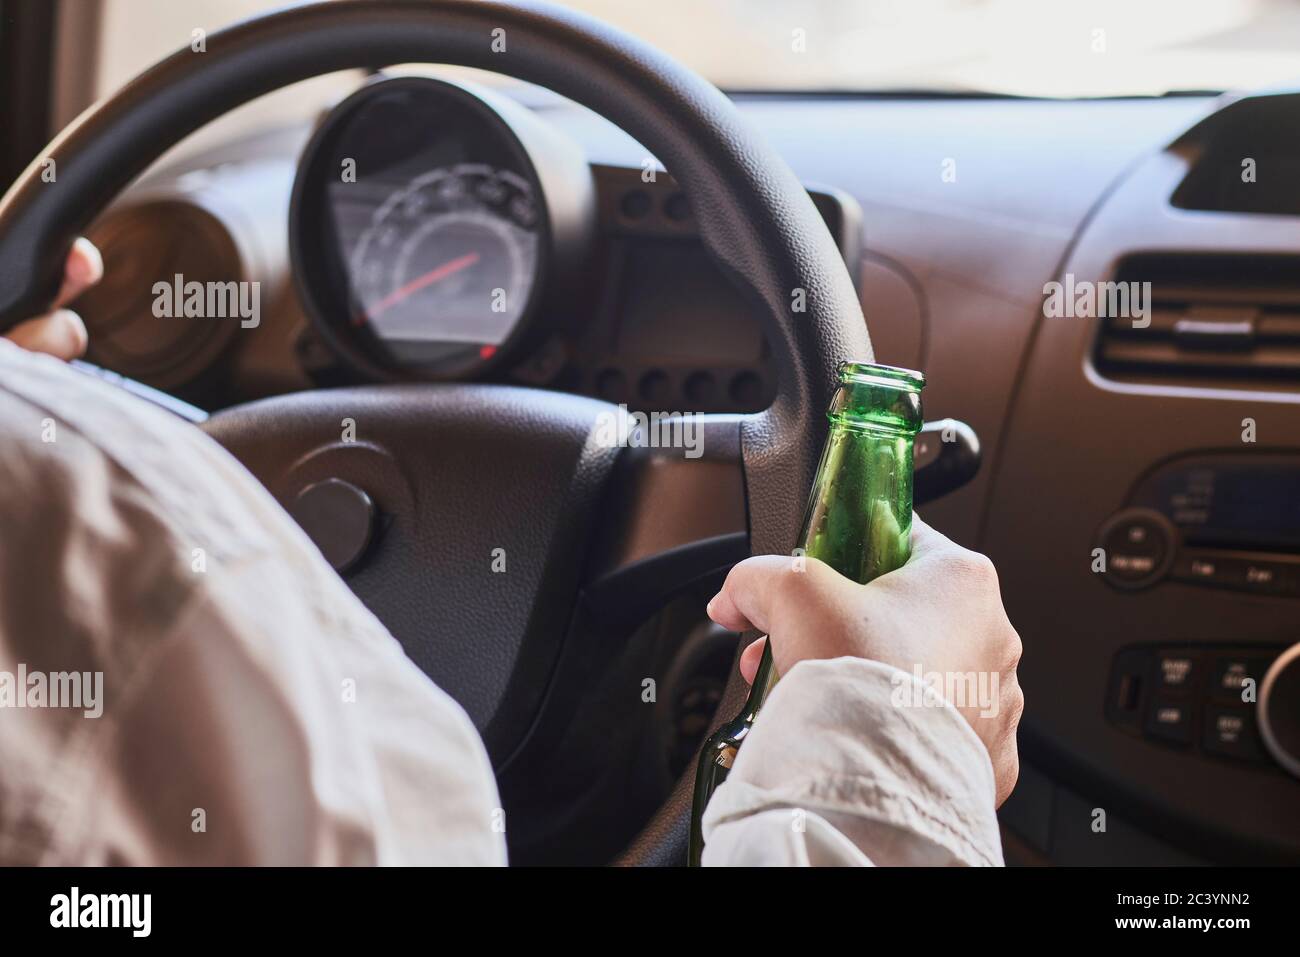 An unrecognizable female drinking beer while driving car. Concepts of driving under the influence, drunk driving or impaired driving Stock Photo